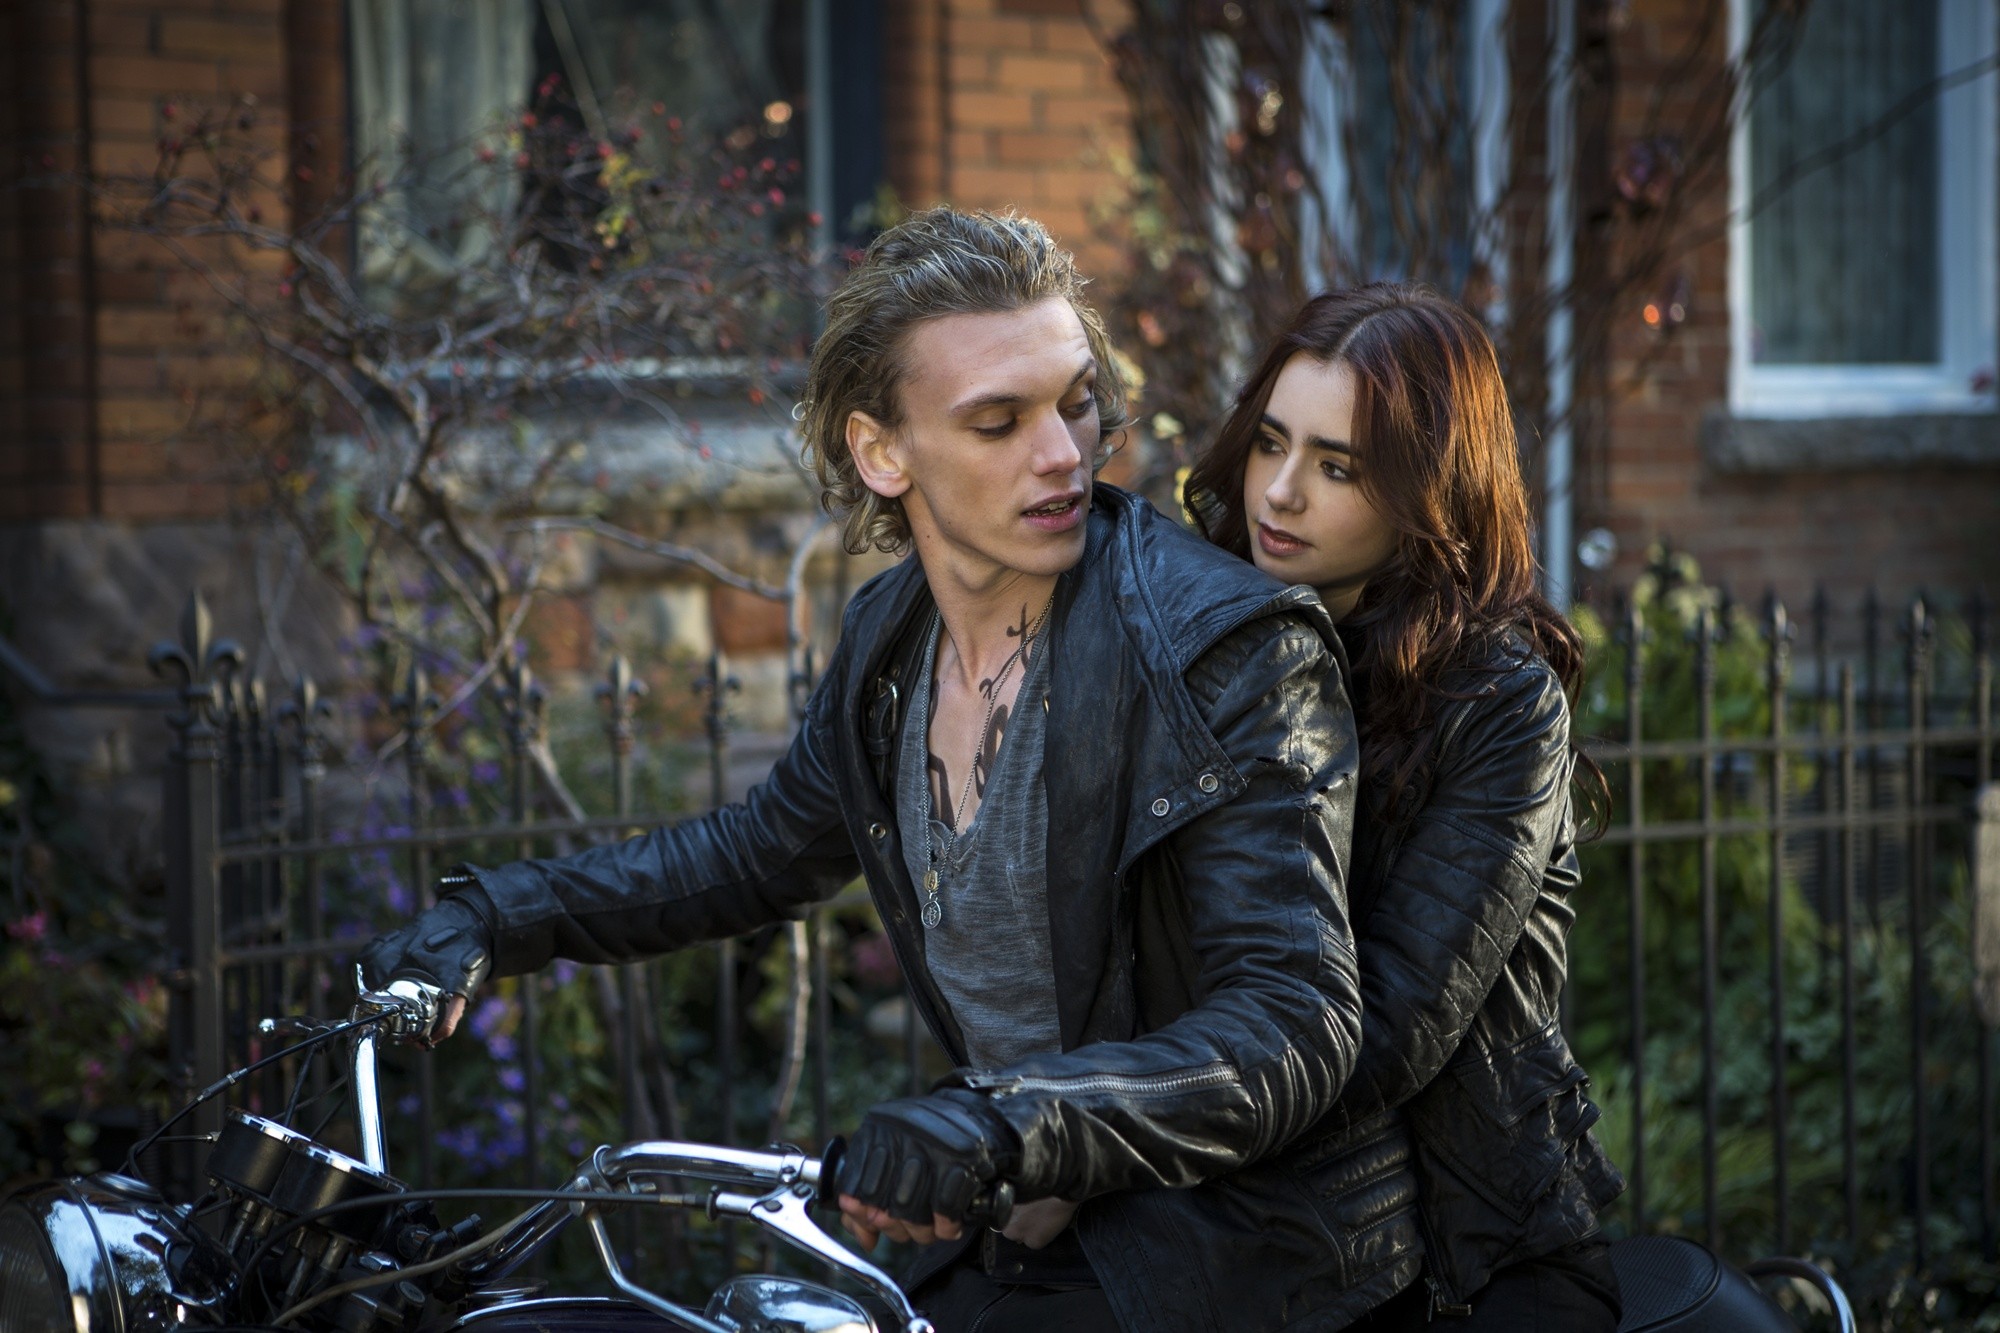 Jamie Campbell Bower stars as Jace Wayland and Lily Collins stars as Clary Fray in Screen Gems' The Mortal Instruments: City of Bones (2013)